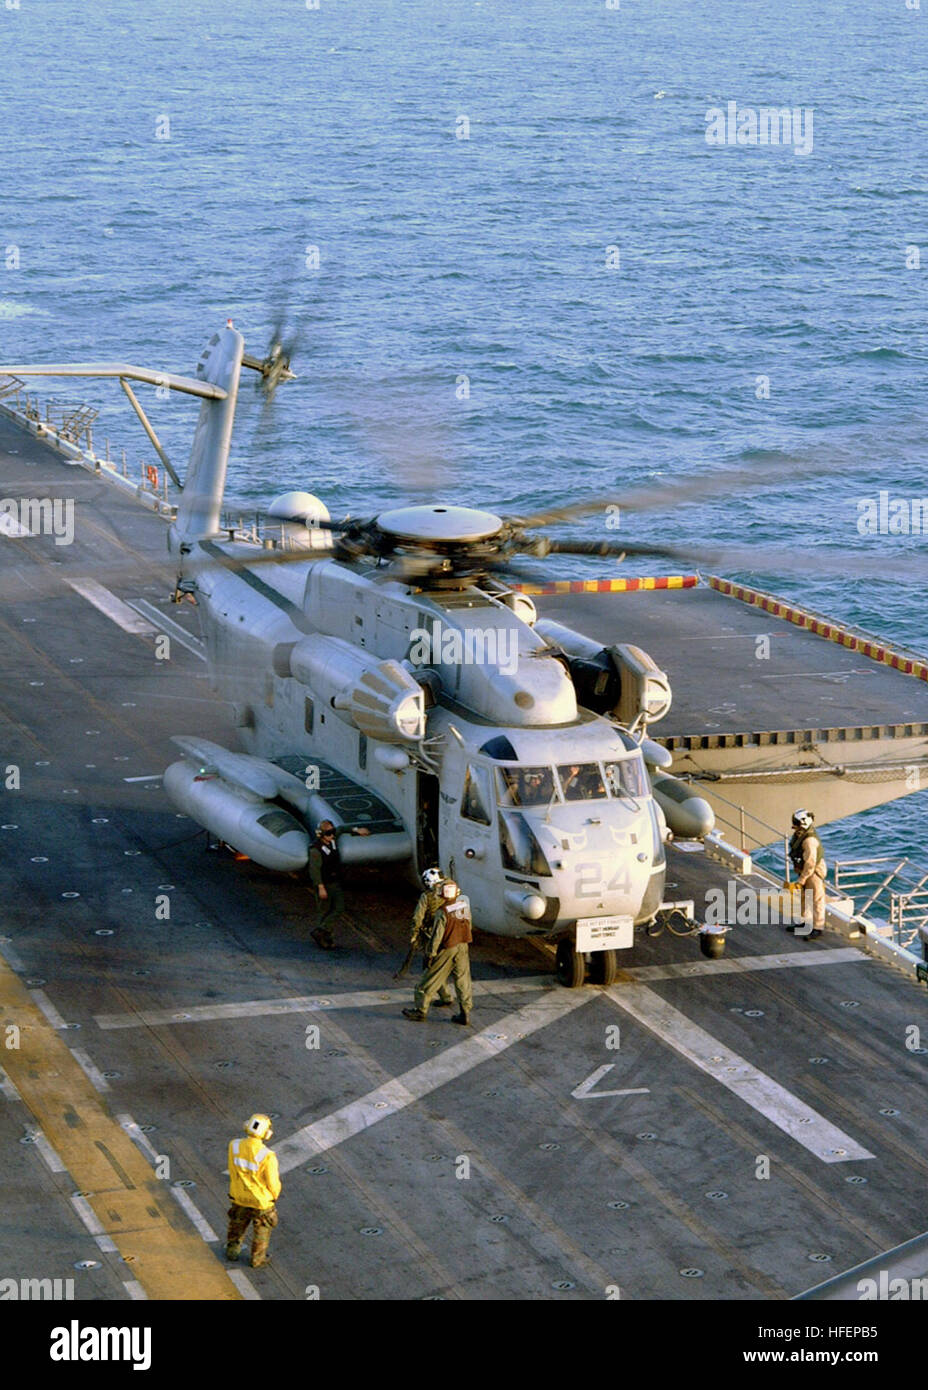 031006-N-6895M-002 Arabian Sea (Oct. 6, 2003) -- A CH-53 'Sea Stallion' assigned to the ÒRidge RunnersÓ of Marine Medium Helicopter Squadron One Six Three (HMM-163) lifts off from the flight deck of USS Peleliu (LHA 5) during daily flight operations. The helicopter squadron is embarked aboard Peleliu while underway in the Arabian Sea. U.S. Navy photo by PhotographerÕs Mate 2nd Class James K. McNeil.  (RELEASED) US Navy 031006-N-6895M-002 A CH-53 Sea Stallion lifts off from the flight deck of USS Peleliu (LHA 5) Stock Photo